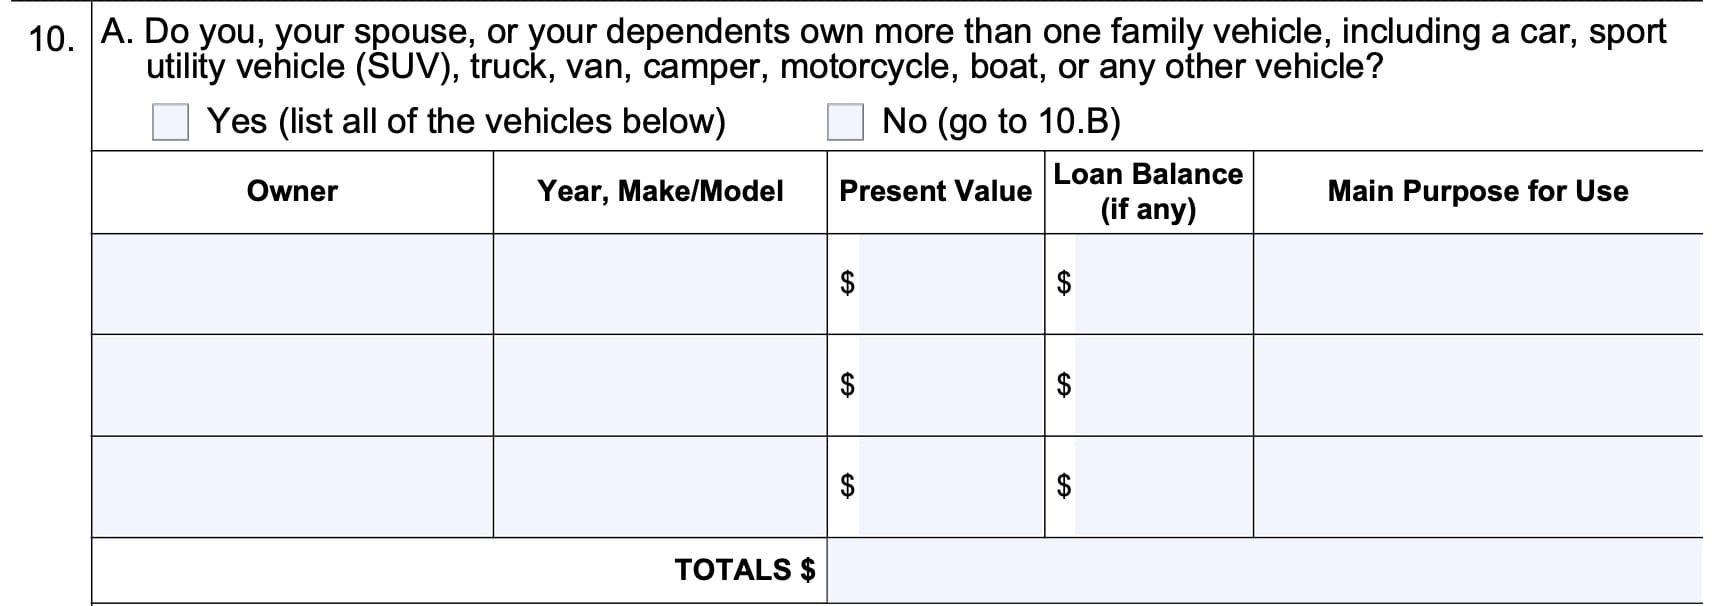 Question 10A: Do you, your spouse, or dependents own more than one family vehicle?